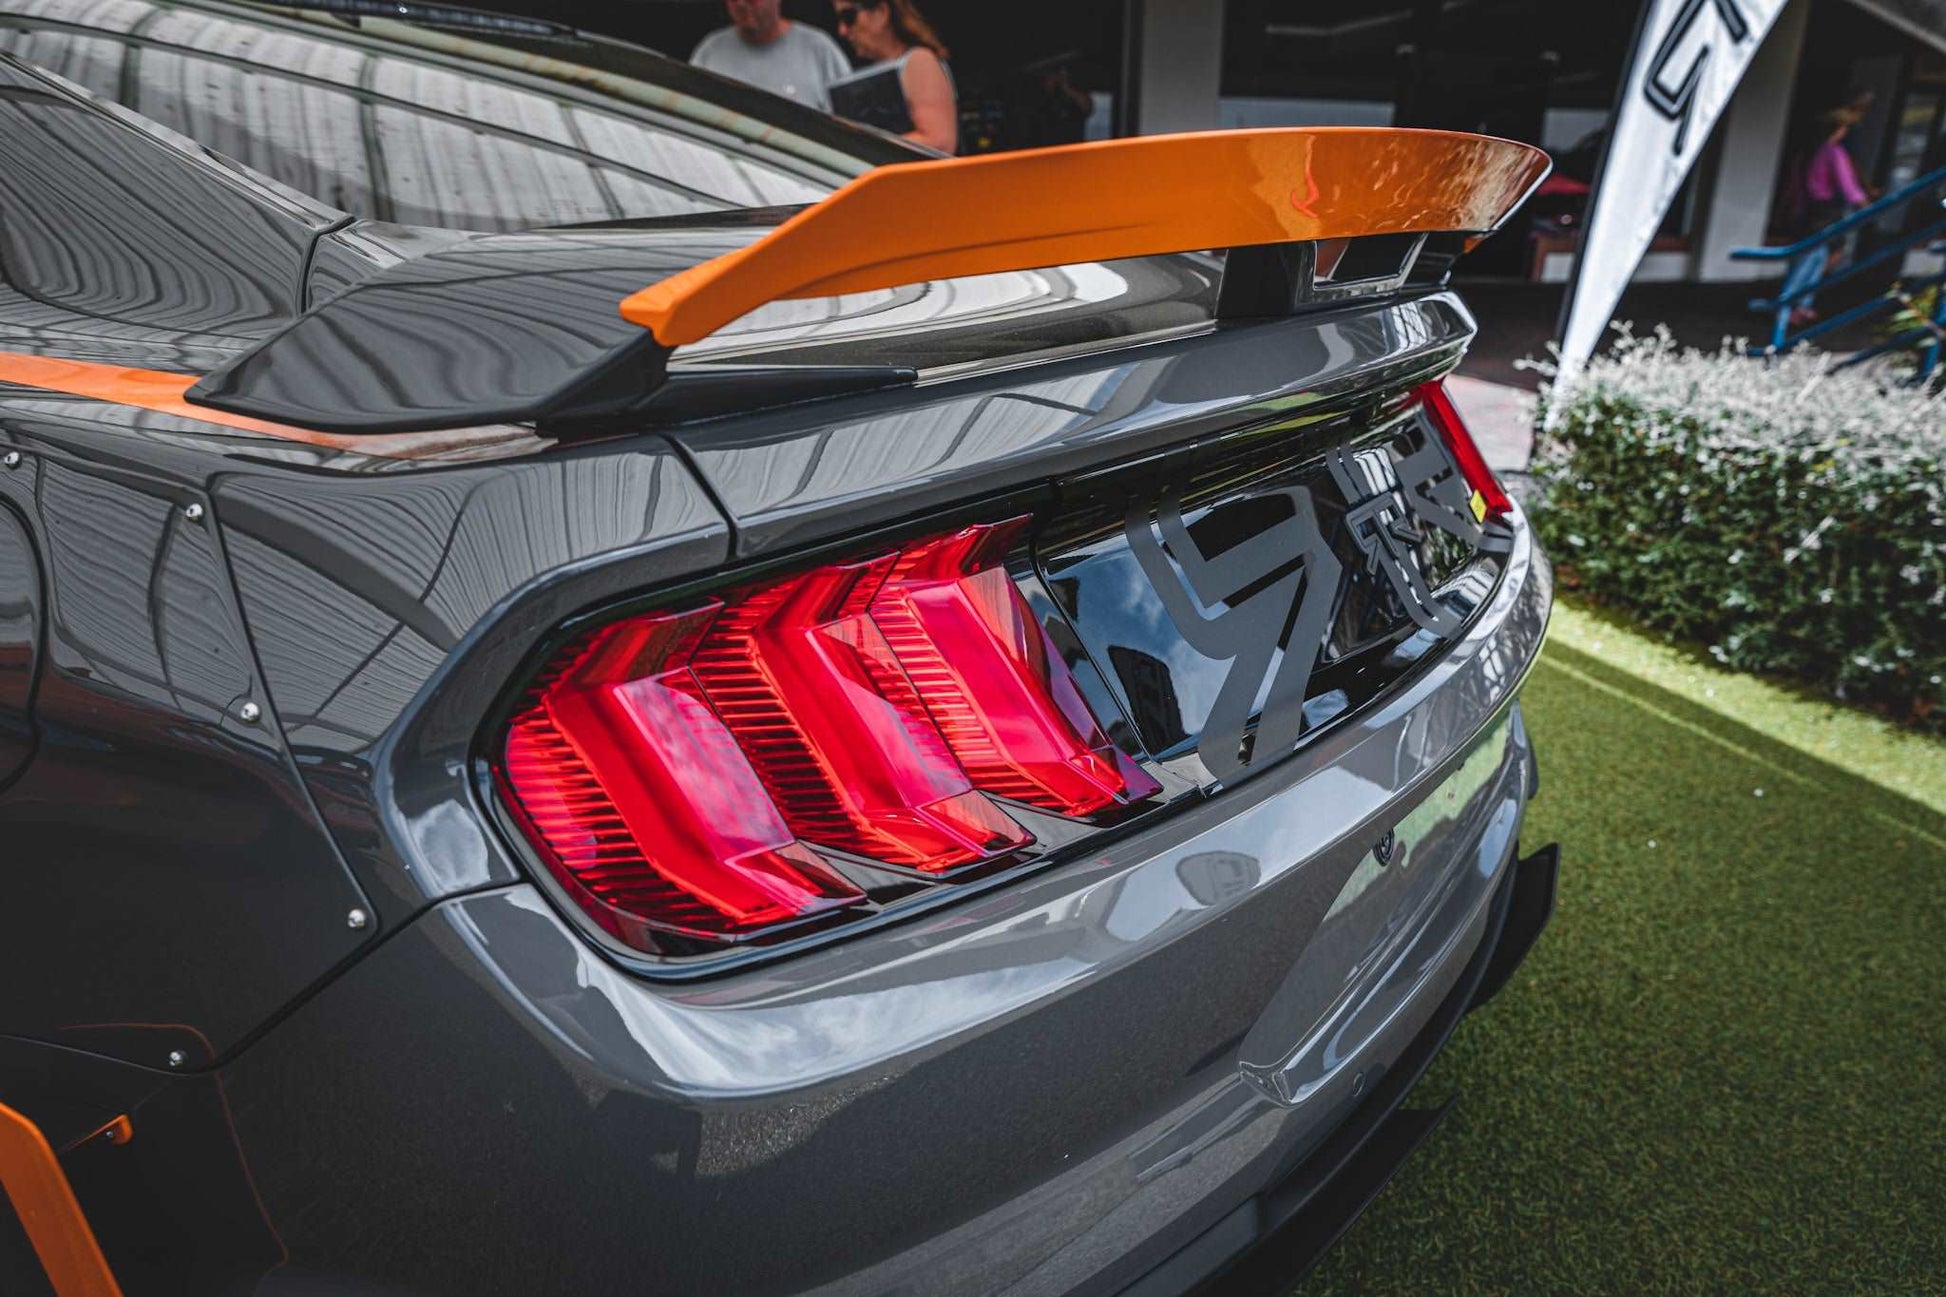 2015+ Mustang Sequential LED Taillight Upgrade (Red Lens)